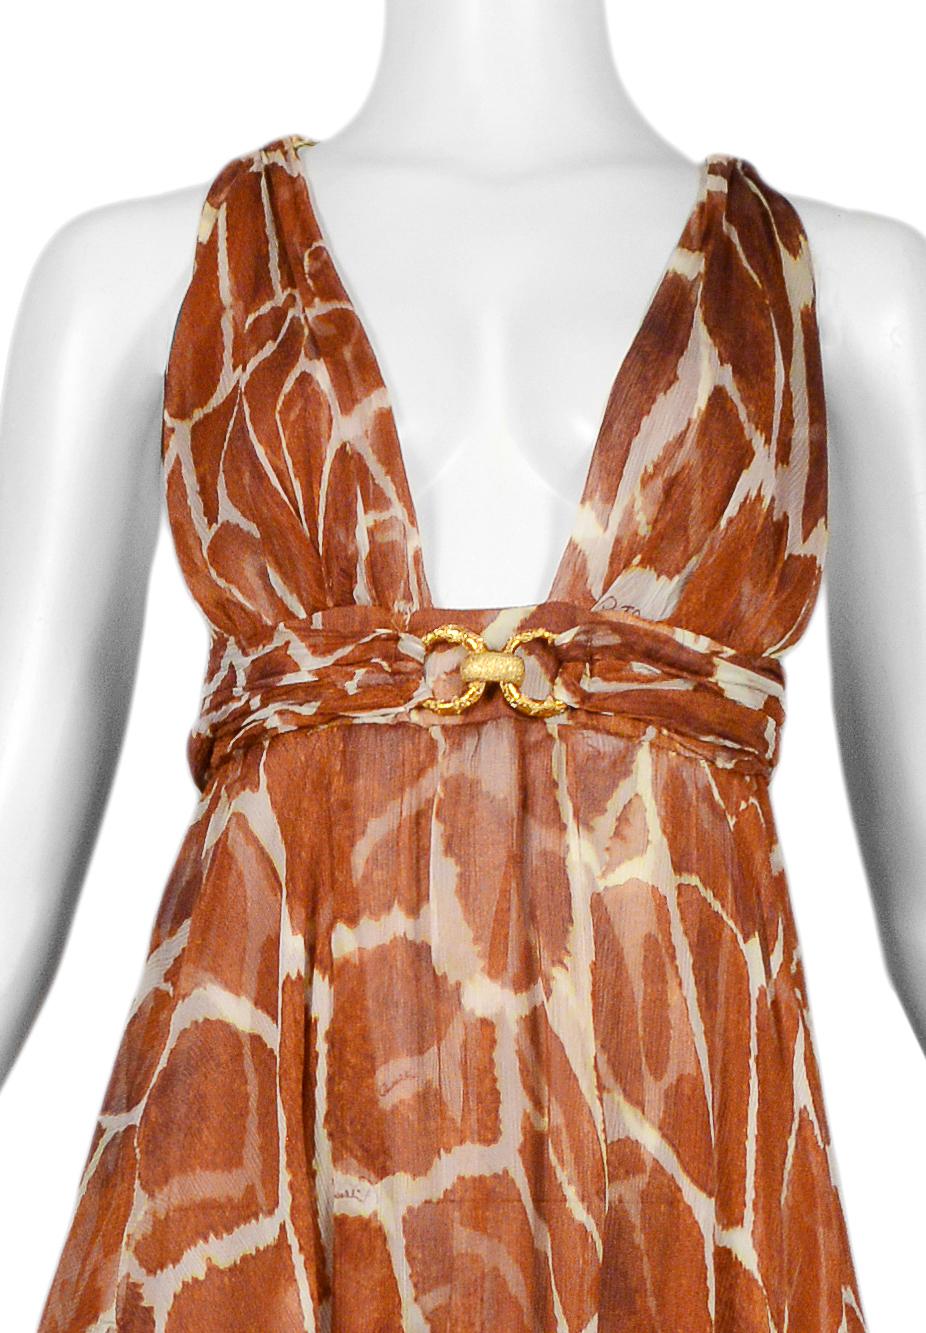 Resurrection Vintage is excited to offer a vintage Roberto Cavalli halter dress featuring an allover giraffe print, deep V, handkerchief hem, and gold clasp at the bust and straps. 

Roberto Cavalli
Size 44
Chiffon
Made In Italy
2006